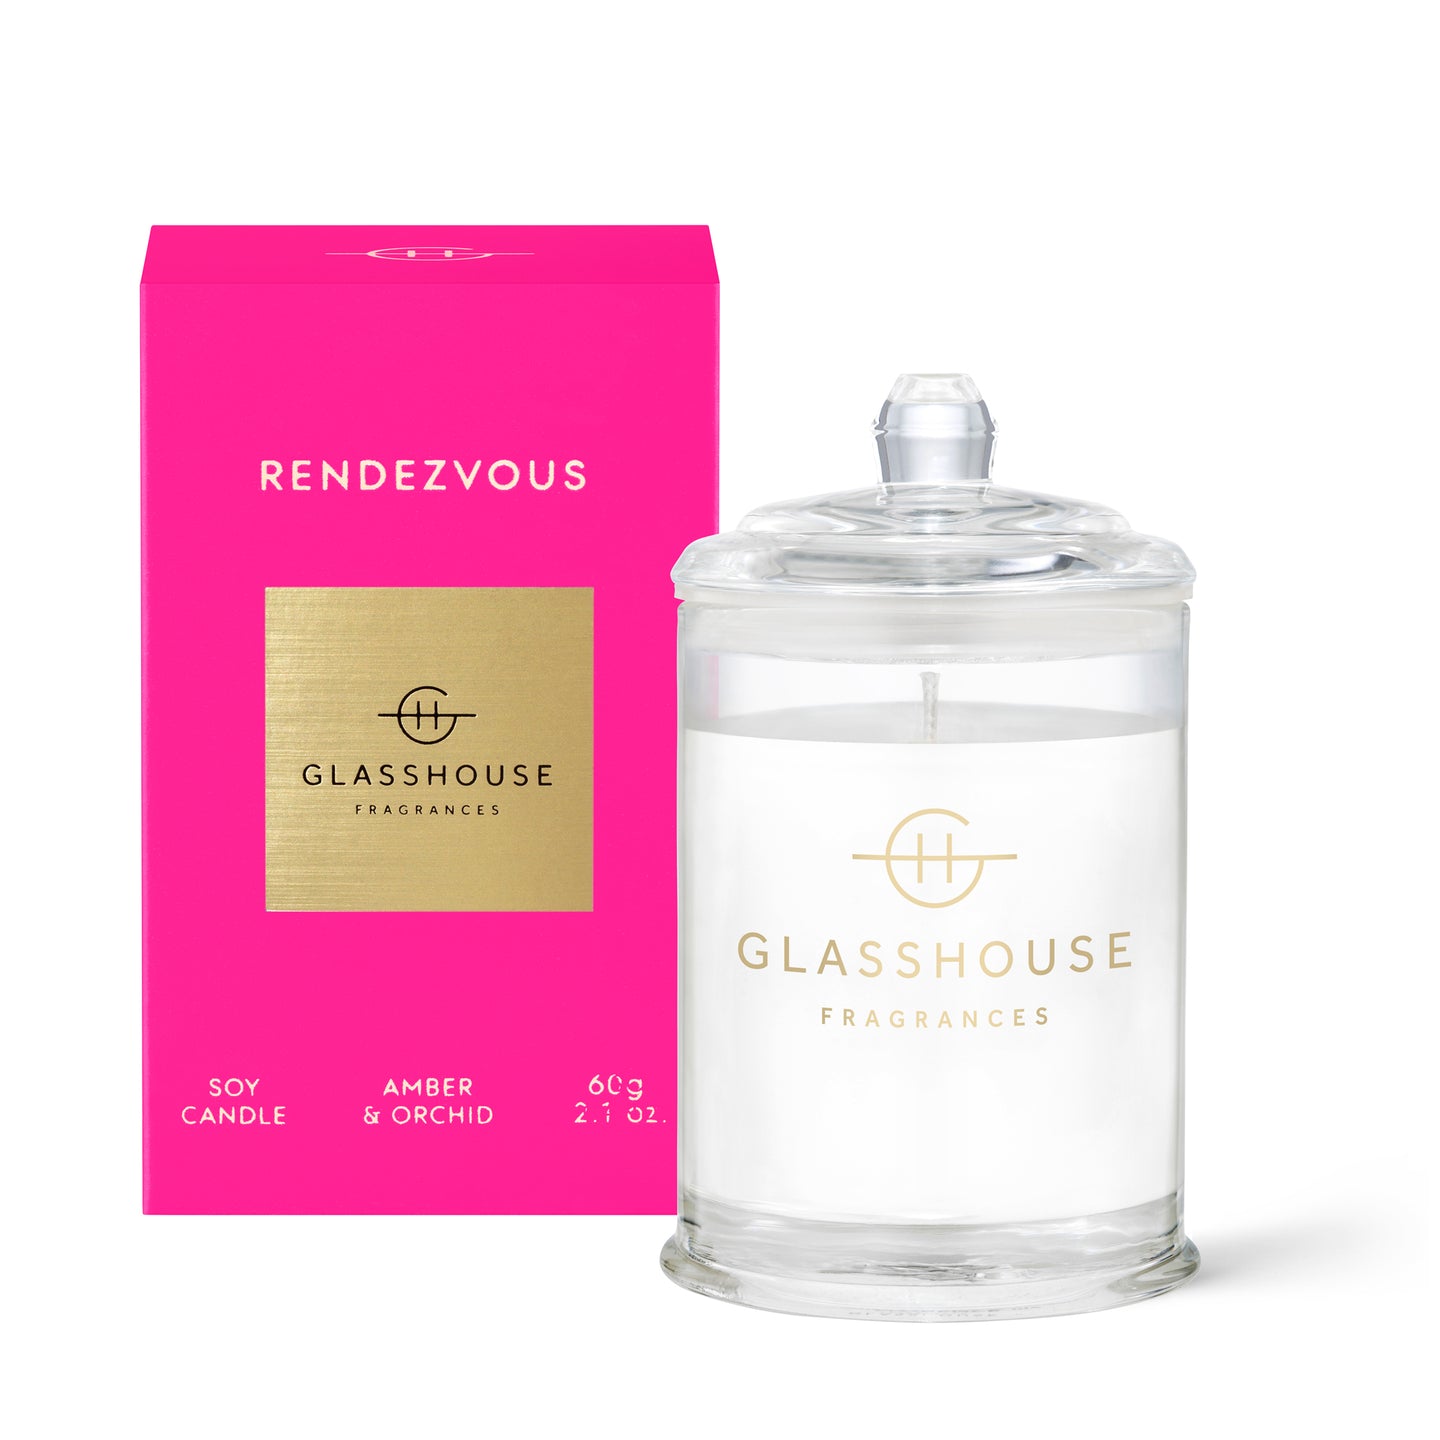 Rendezvous by Glasshouse. 60g-Soy-Candle